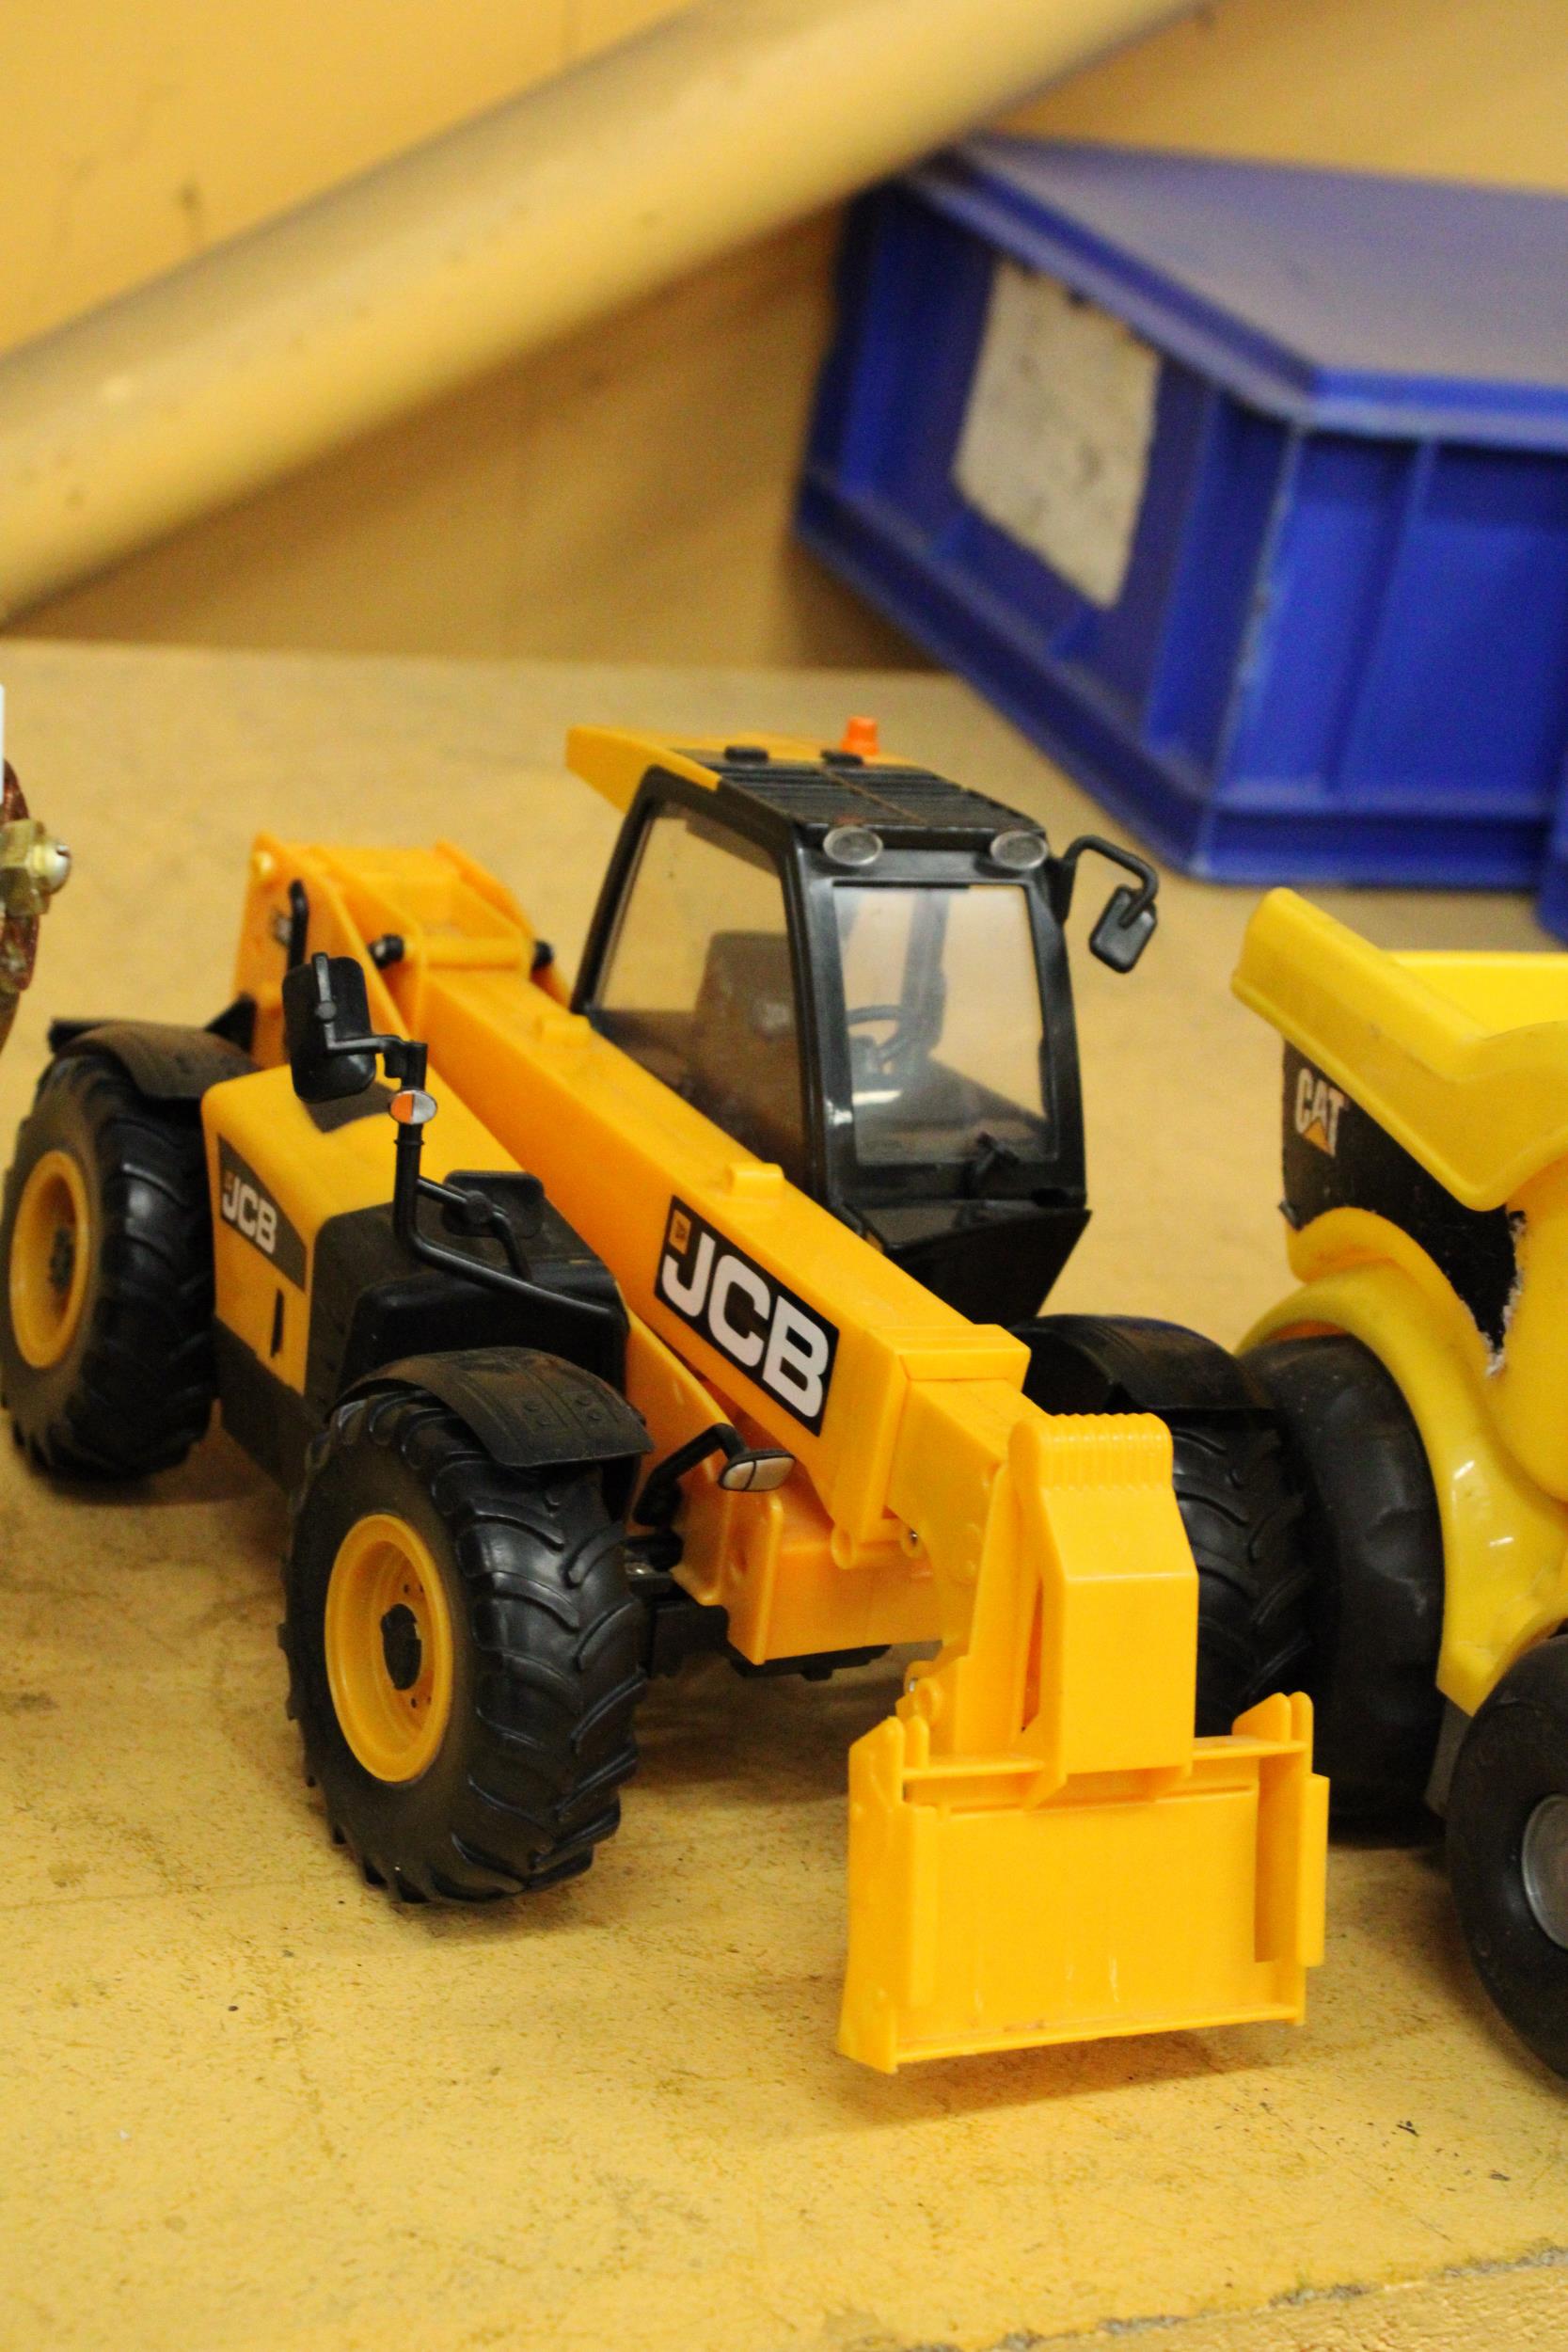 FIVE CAT AND JCB TOY VEHICLES - Image 2 of 5